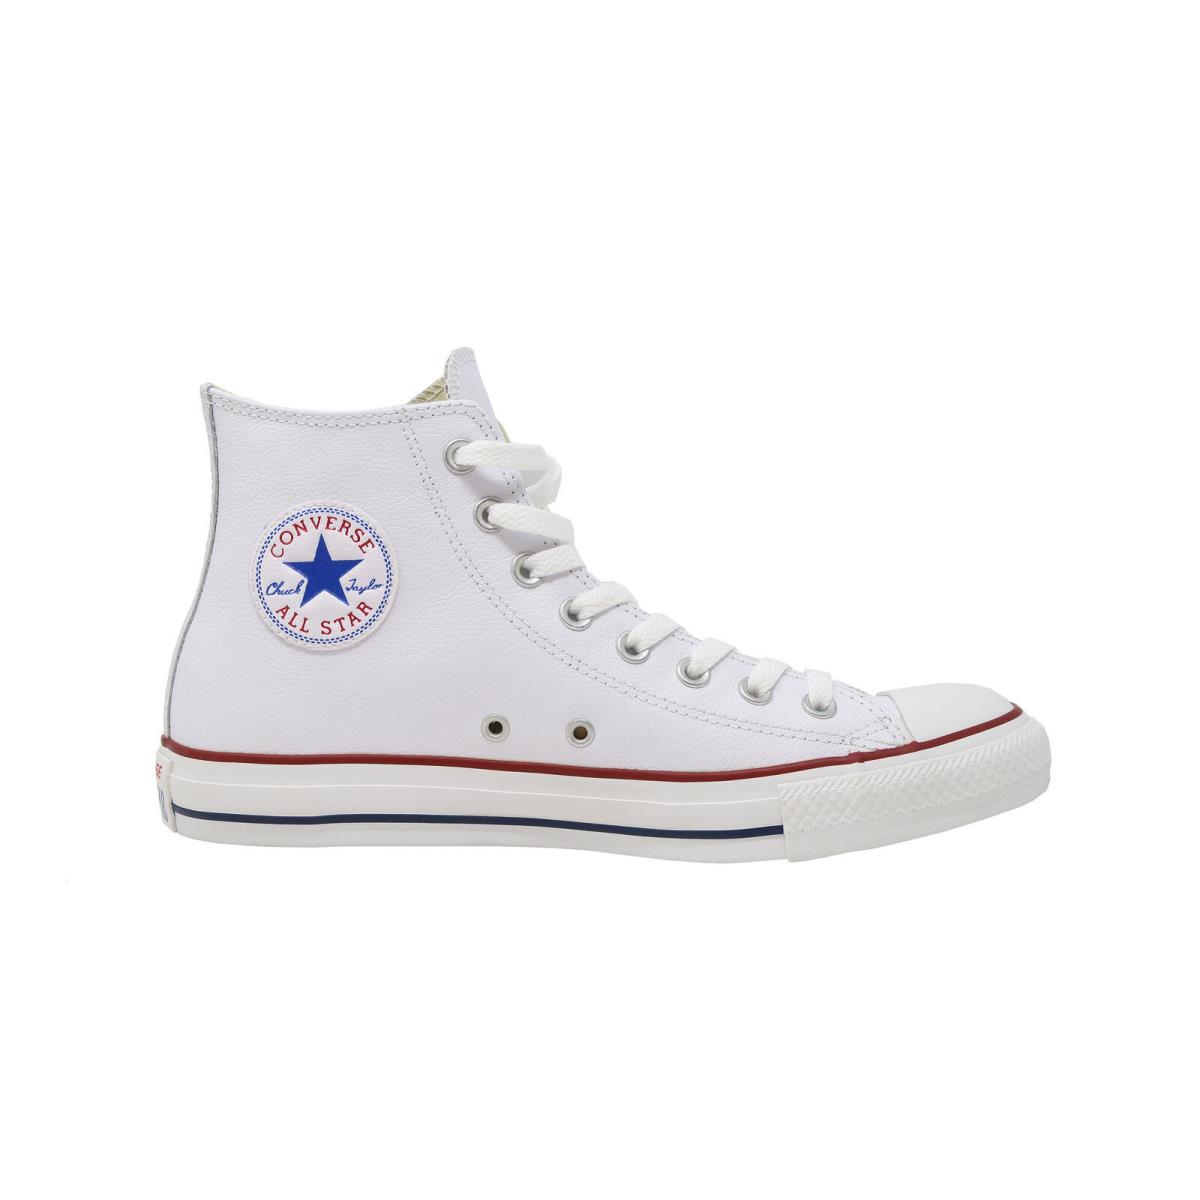 Converse All Star Chuck Taylor Hi Top White Leather Red Sneakers Men Women Shoes - White , Optical White Manufacturer